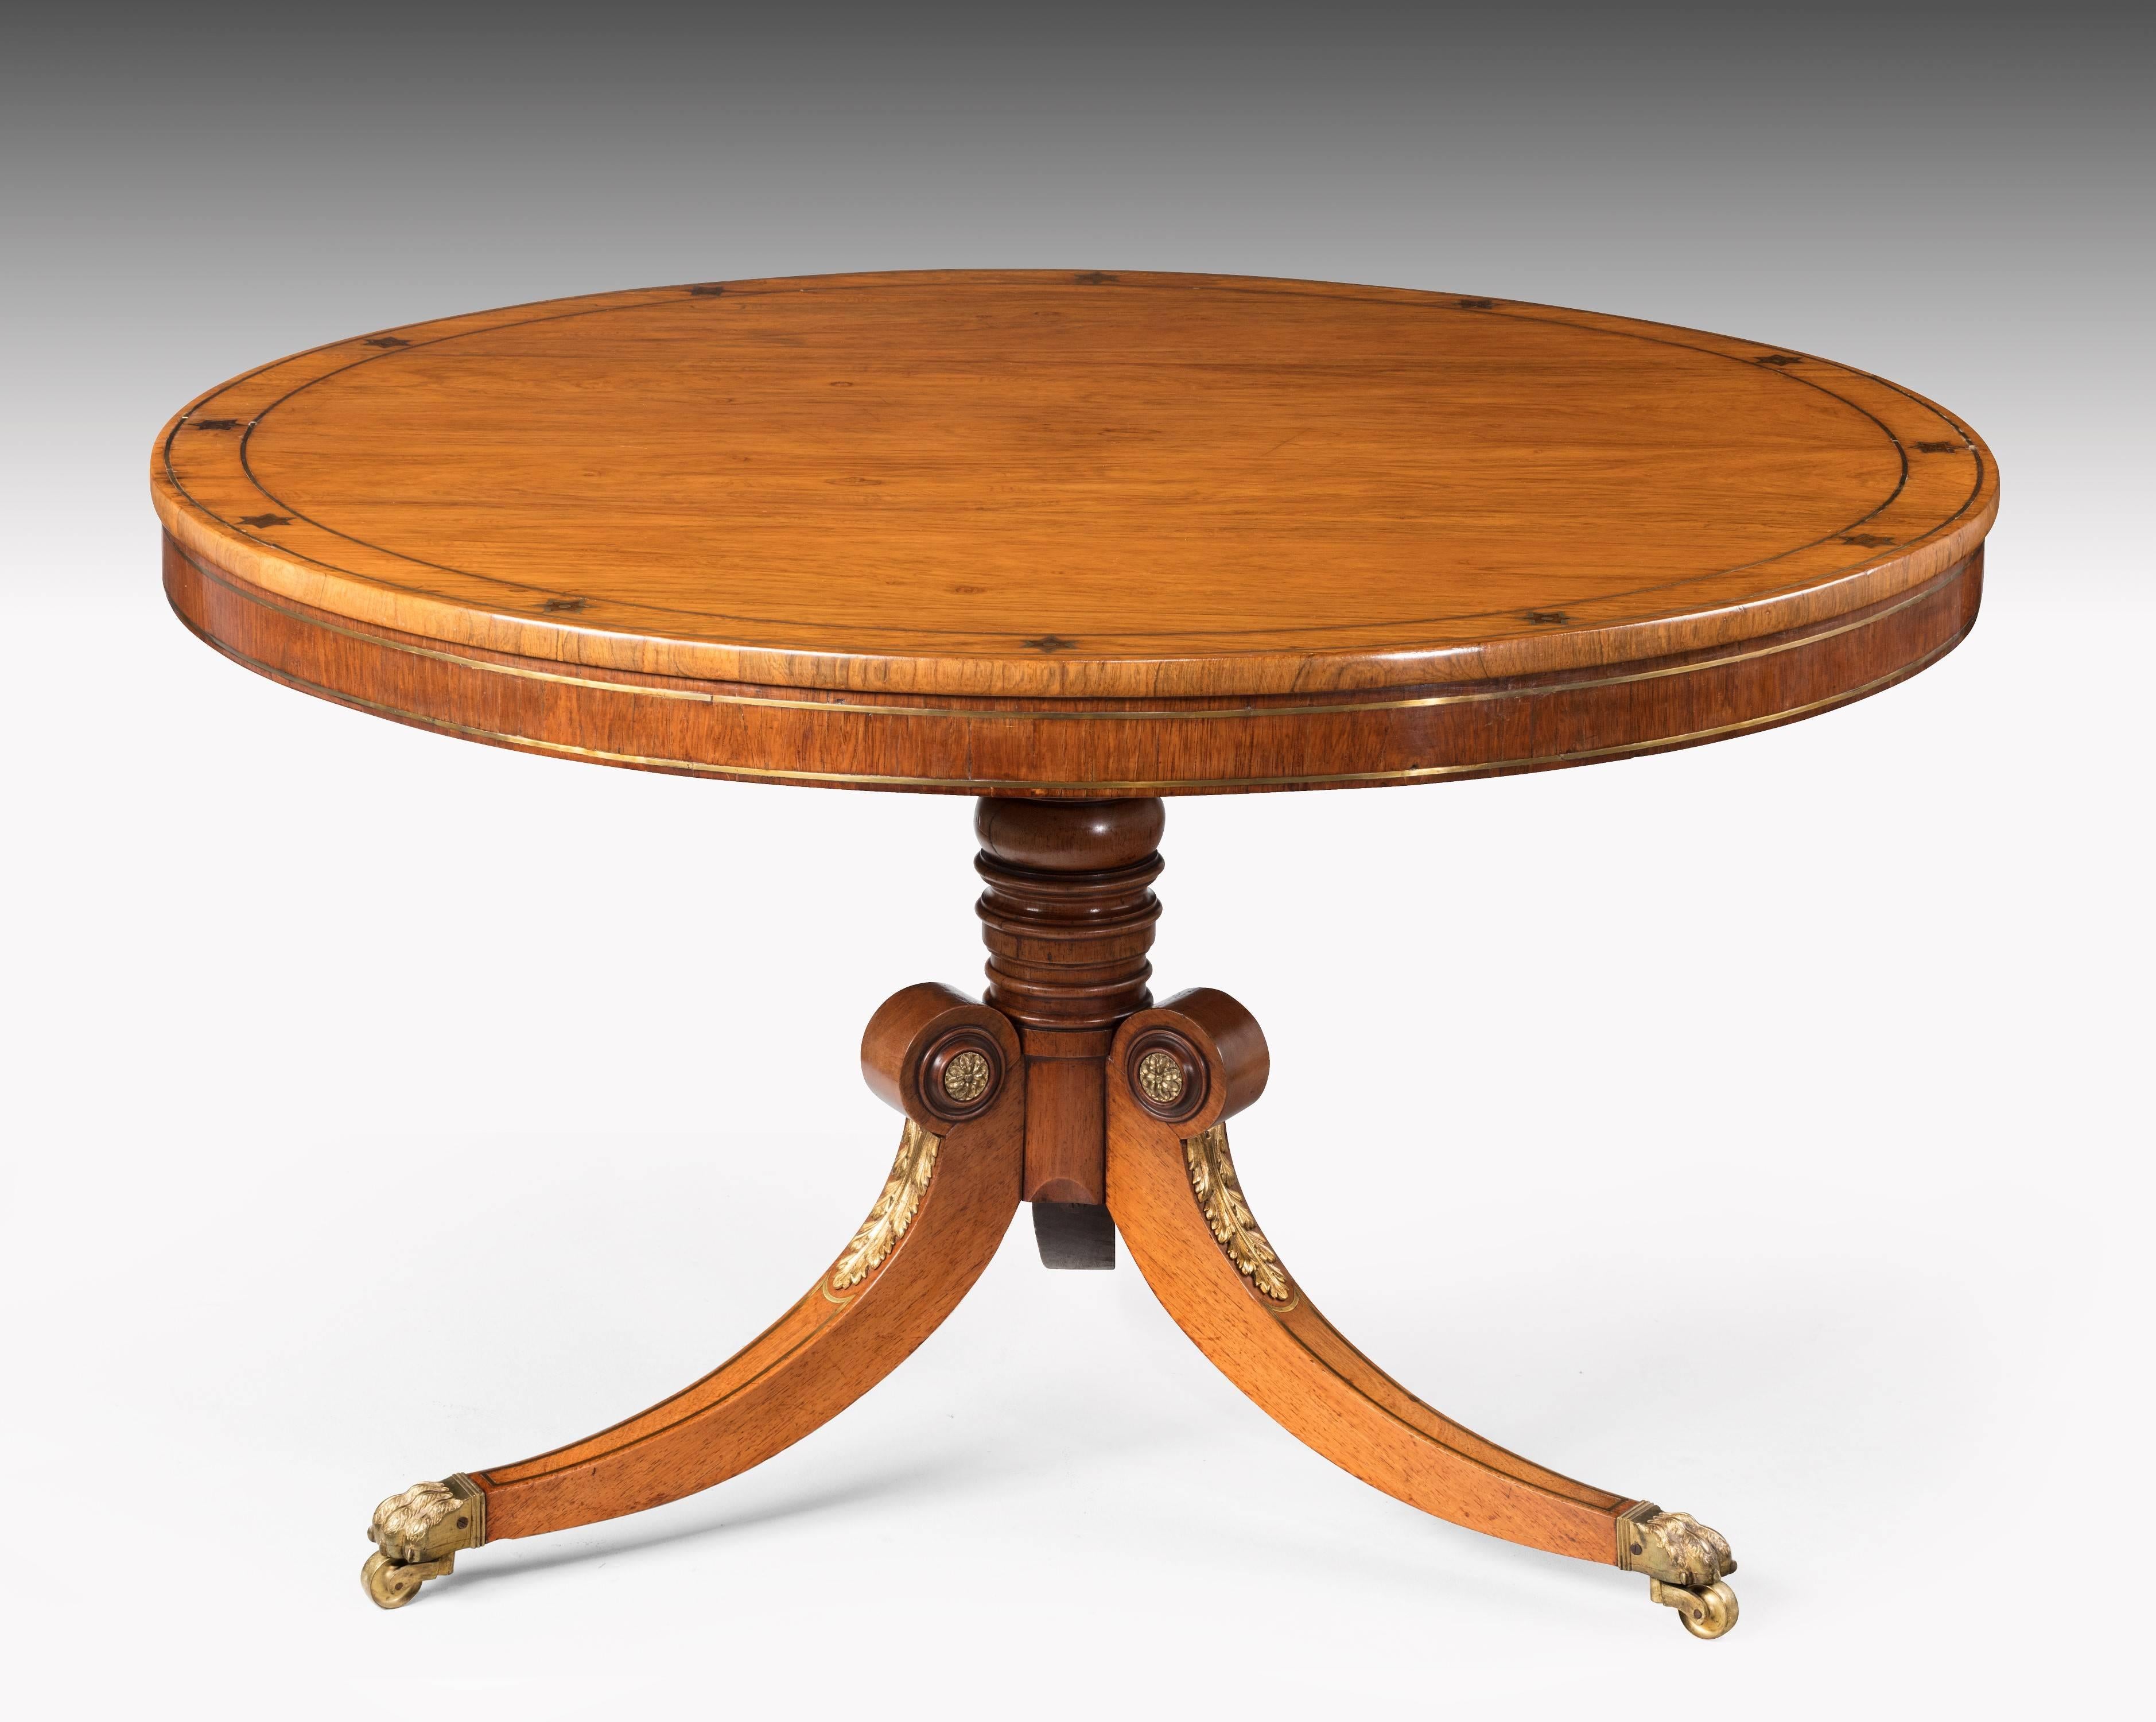 A very good quality Regency period circular table. The outer rim with a double brass inlay incorporating stylized stars. The base with swept supports and finely cast acanthus leaves.